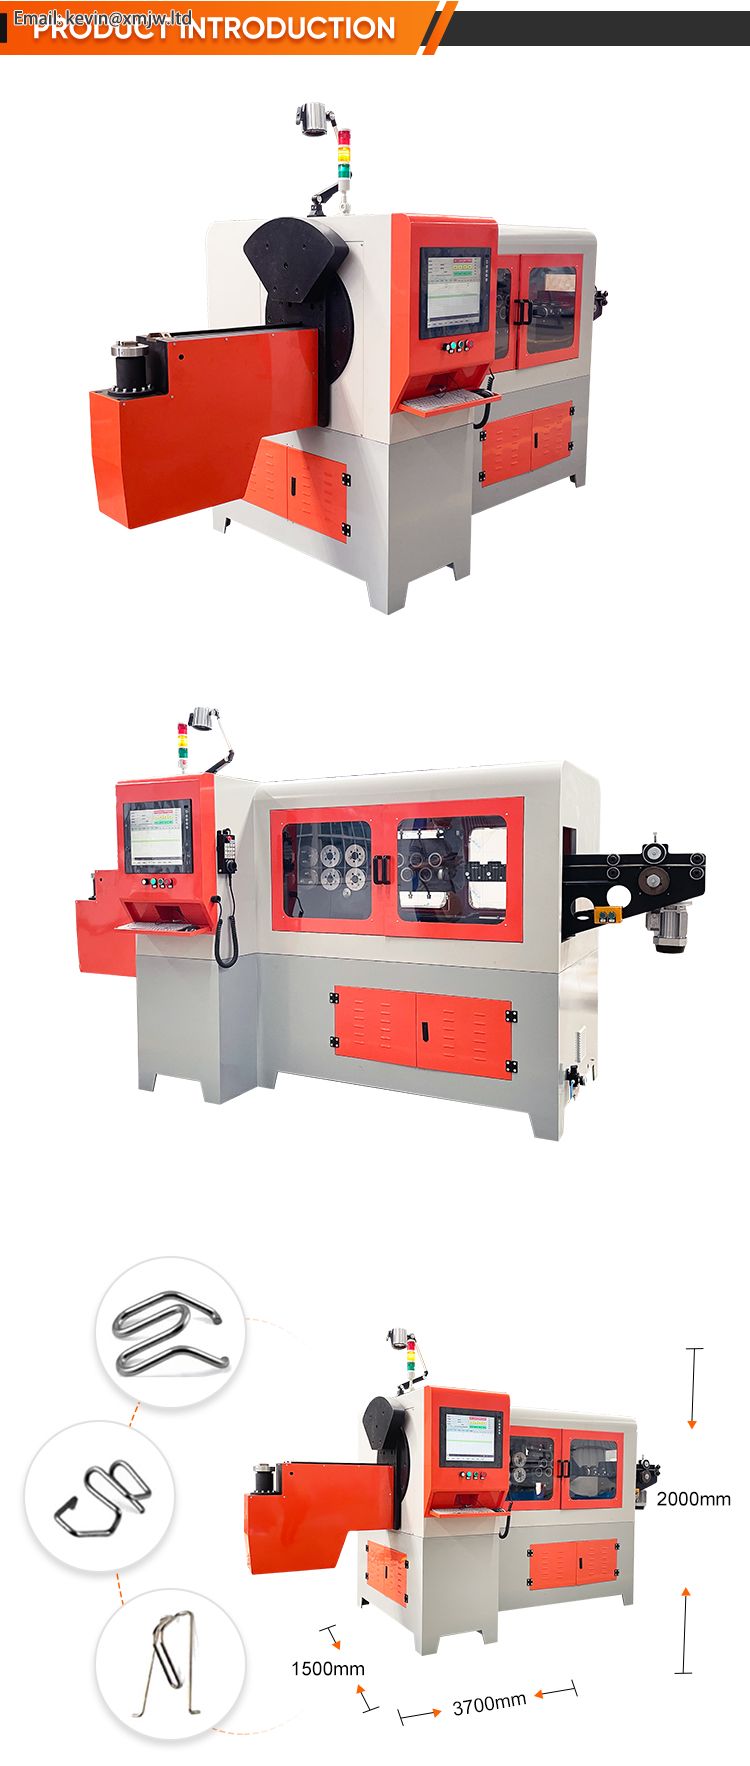 Real factory automatic 3d wire bending machine with multi-forms programming